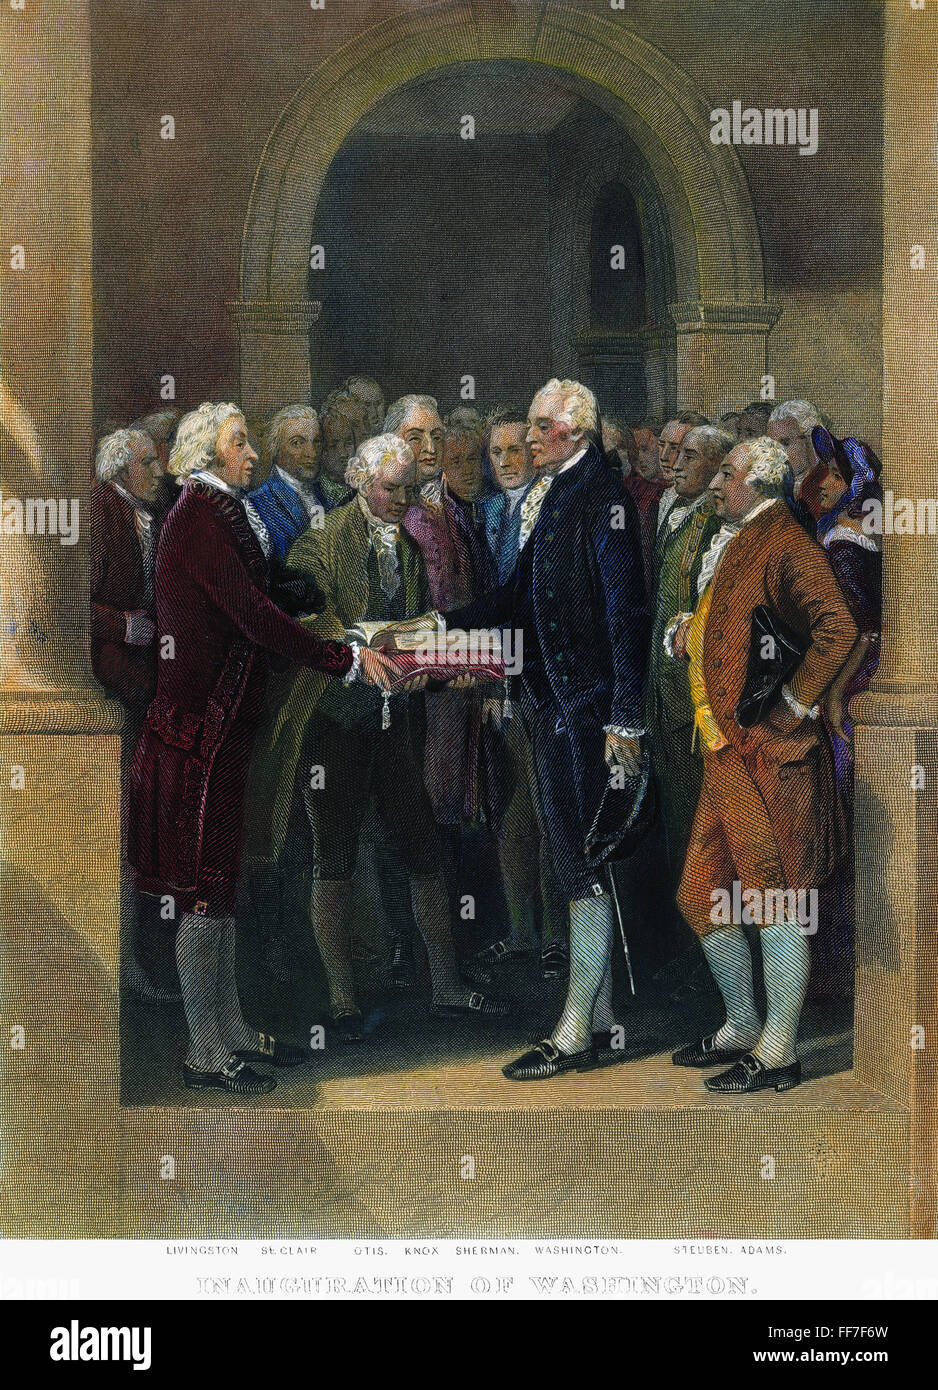 WASHINGTON: INAUGURATION. /nThe inauguration of George Washington as the first president of the United States at Federal Hall, New York City, 30 April 1789. Coloured engraving, 19th century. Stock Photo